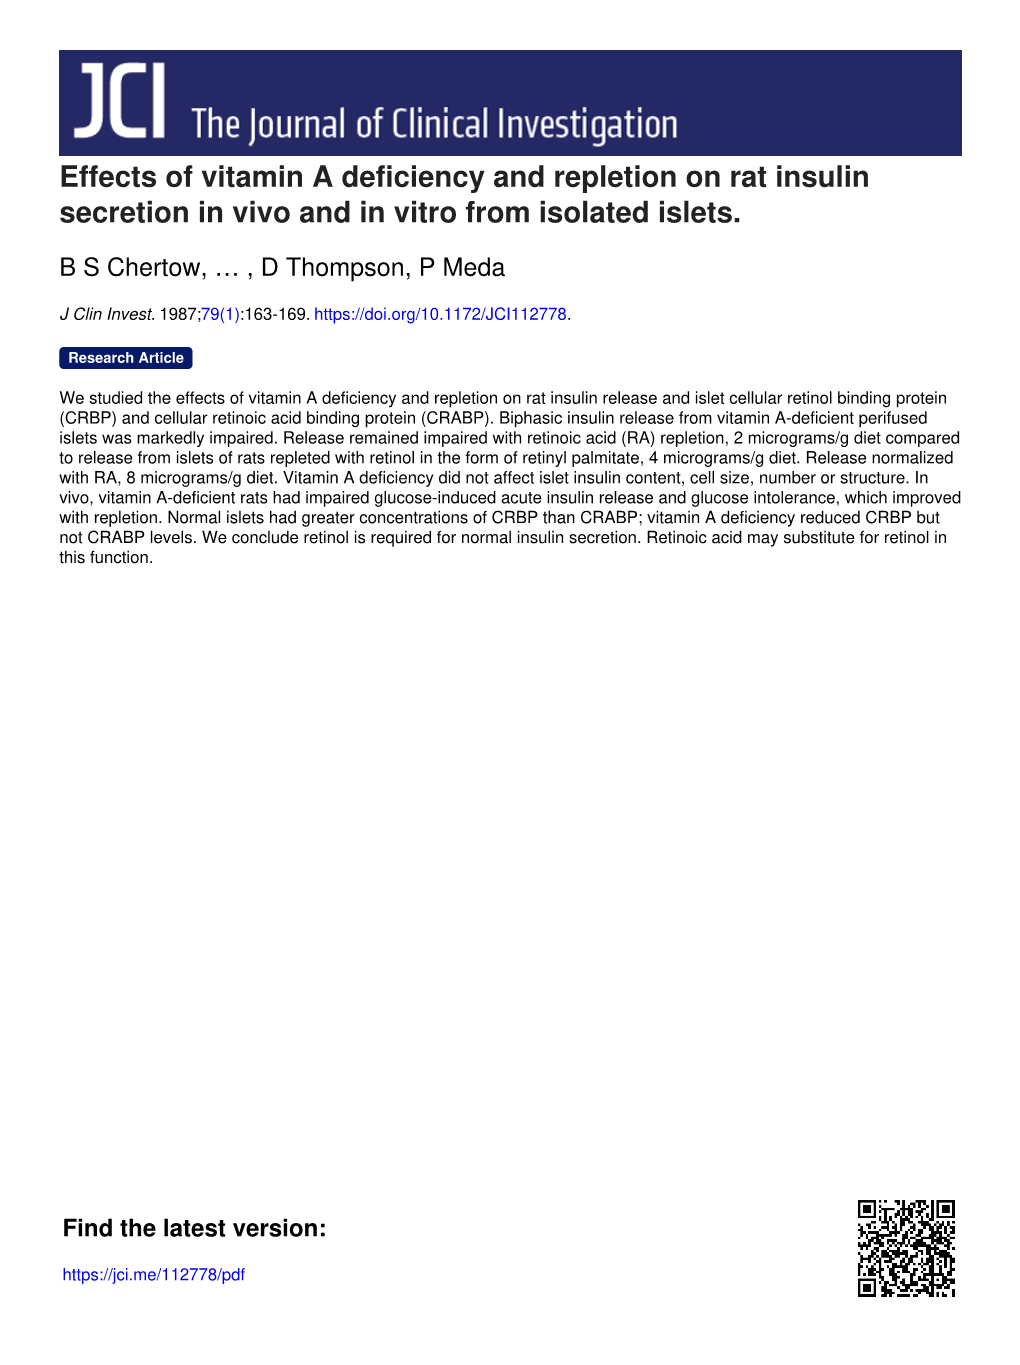 Effects of Vitamin a Deficiency and Repletion on Rat Insulin Secretion in Vivo and in Vitro from Isolated Islets